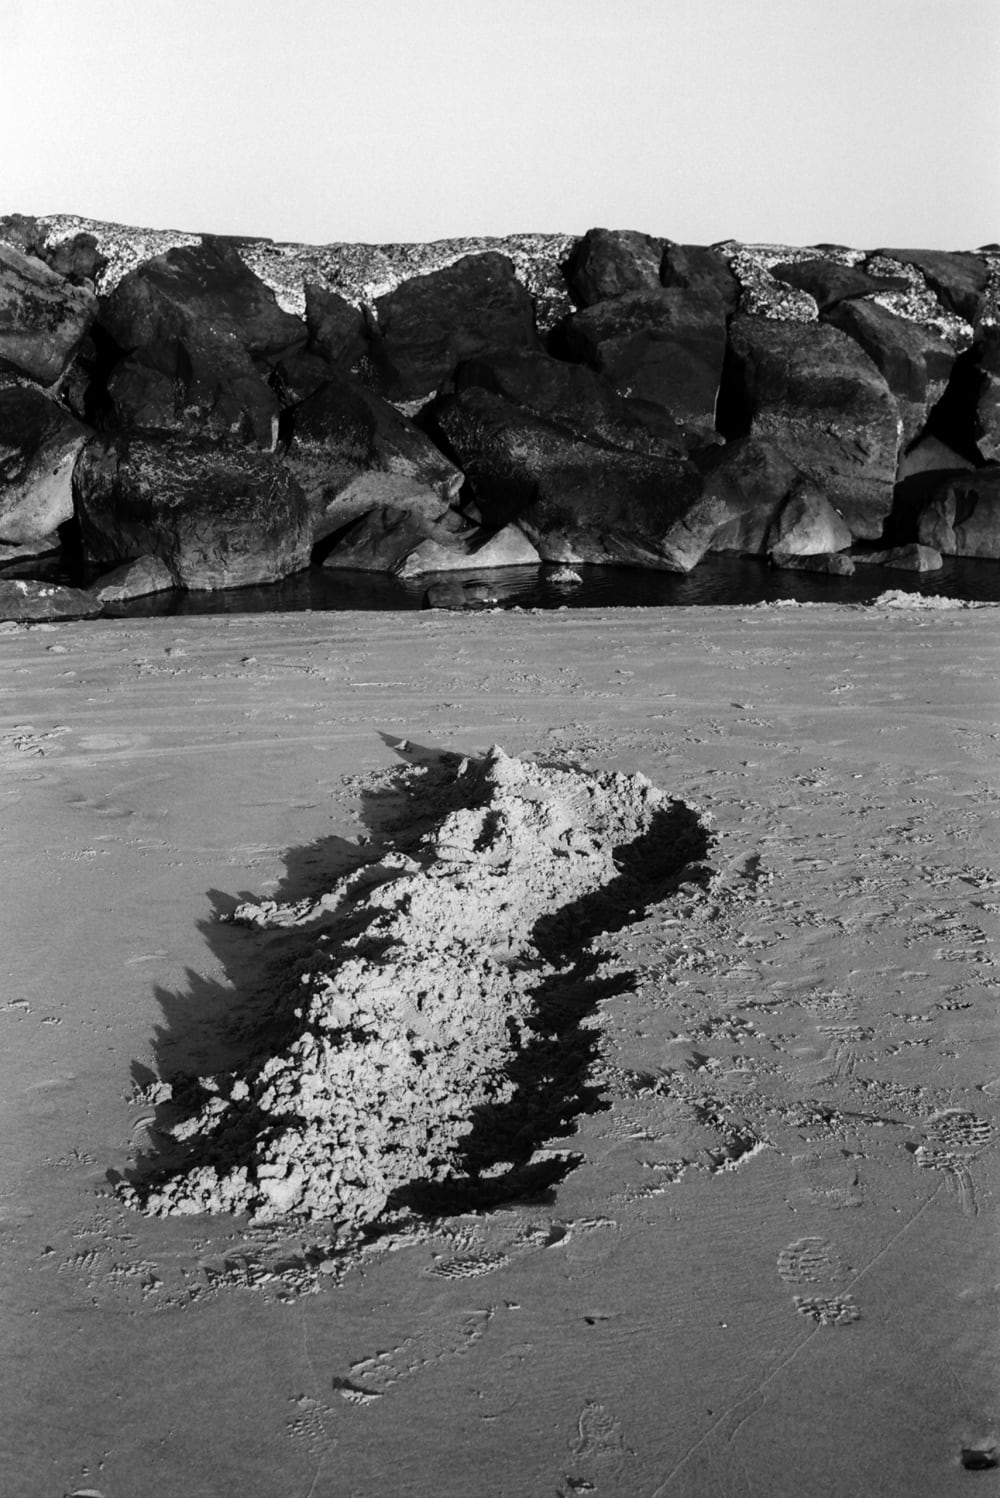 Black and white image of what looks like a length of shallow trench dug into sand, with footprints made by boots alongside, on what appears to be a beach with water and rocks in the background.